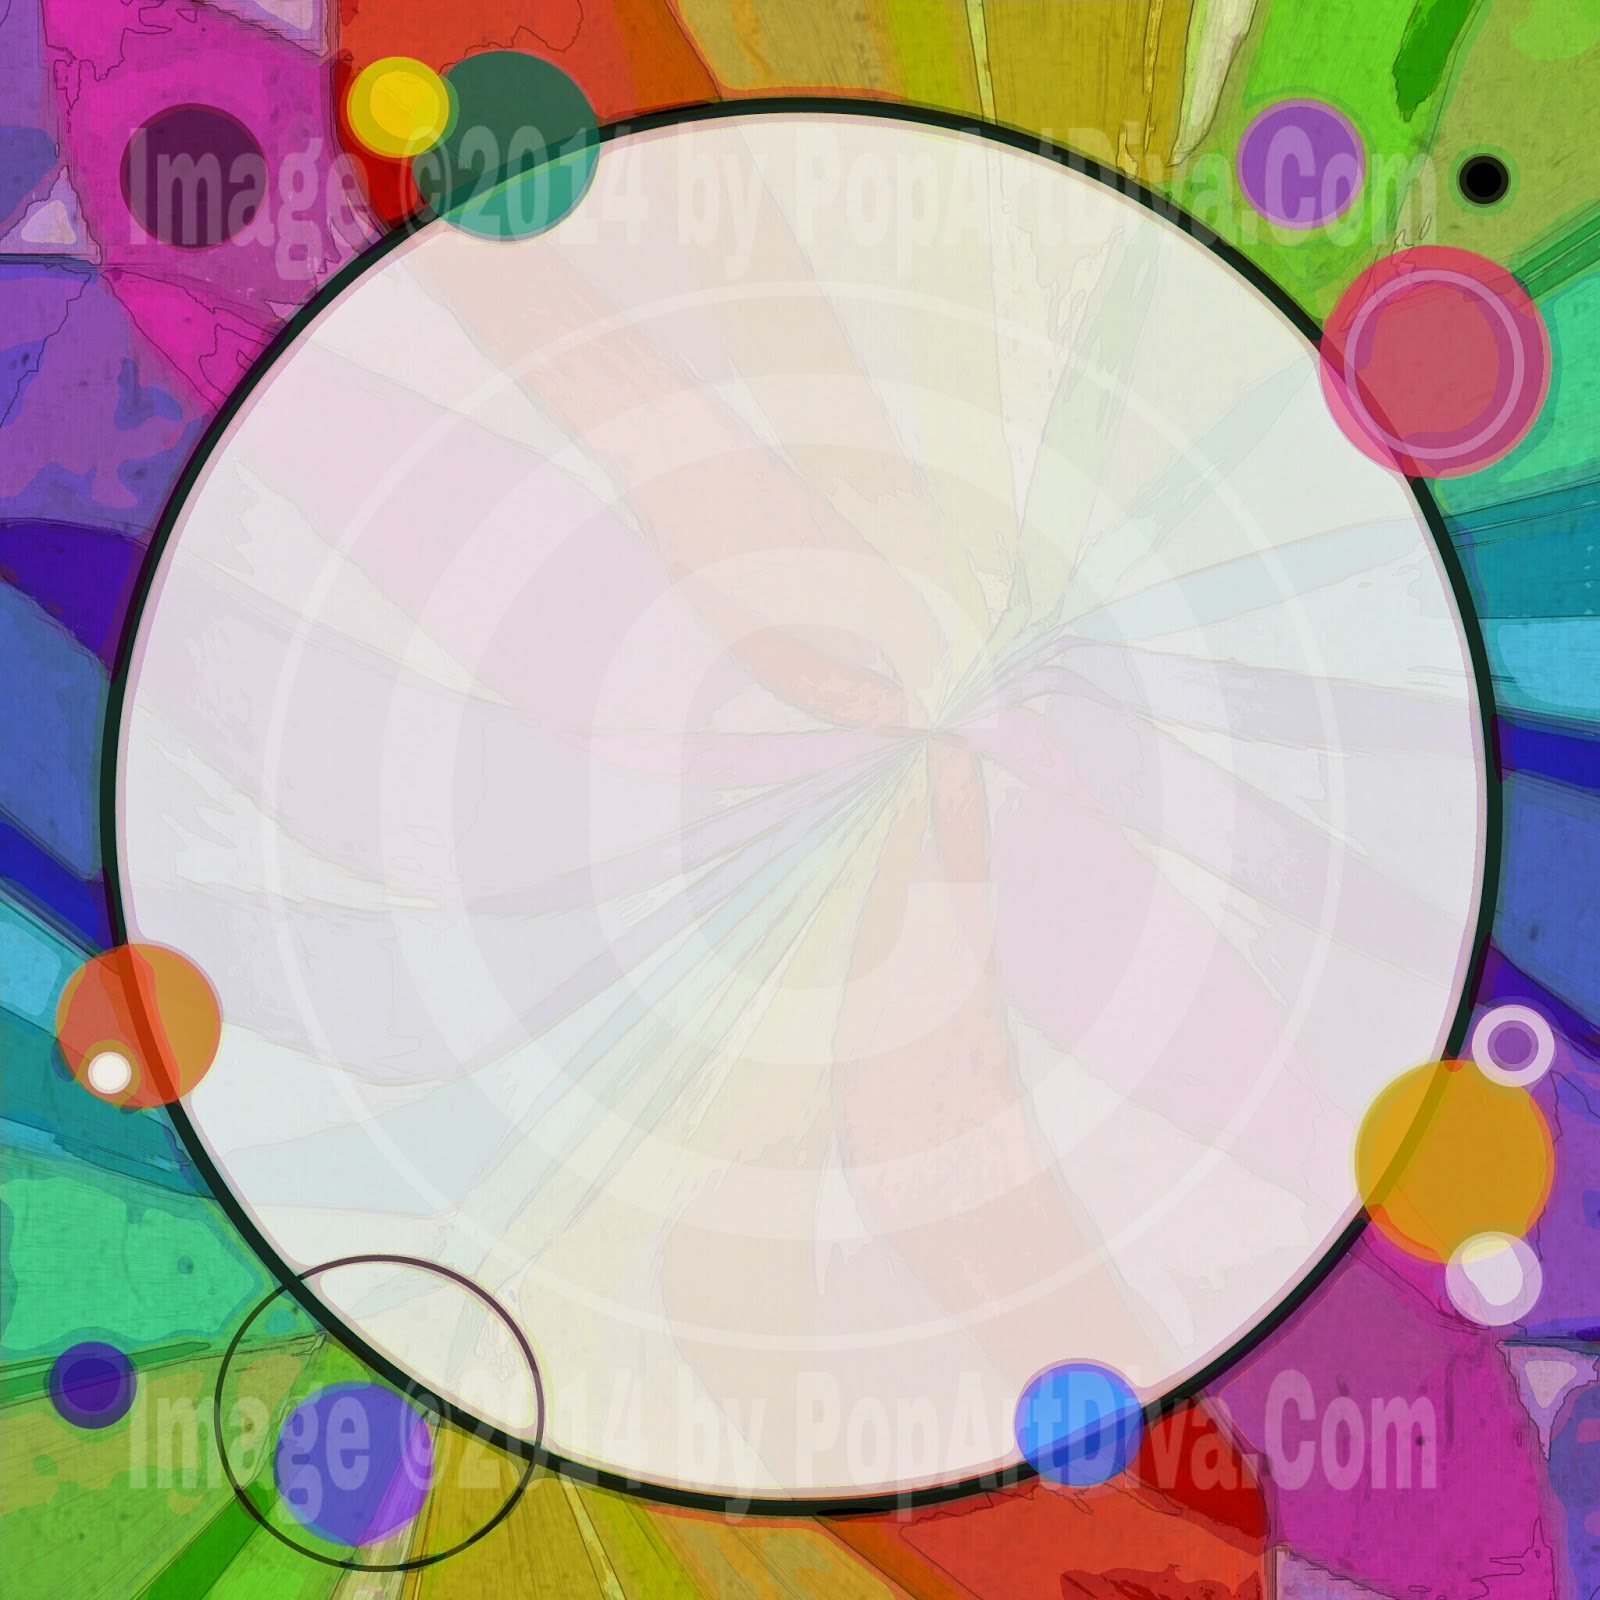 http://store.payloadz.com/details/2084284-photos-and-images-clip-art-kaleidoscope-circle-frame-border-web-graphic.html